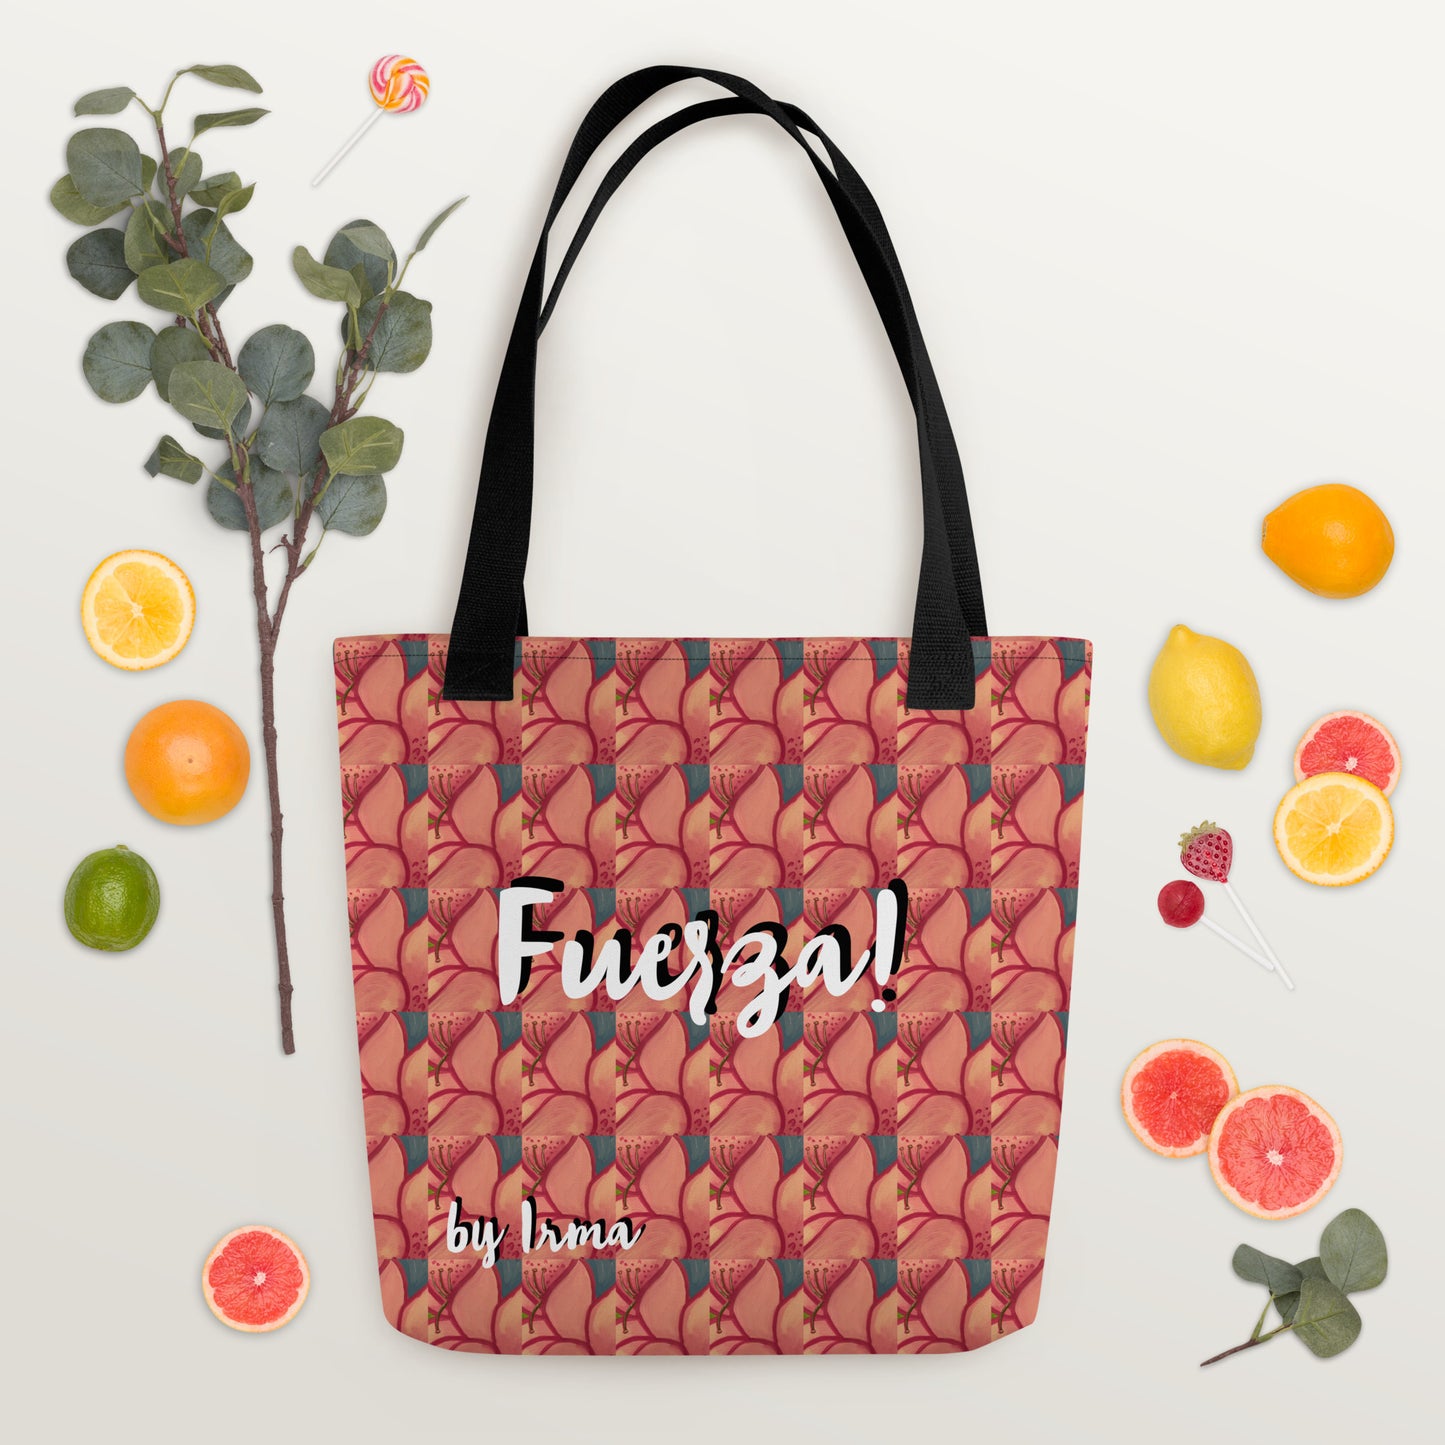 Fuerza by Irma Tote bag